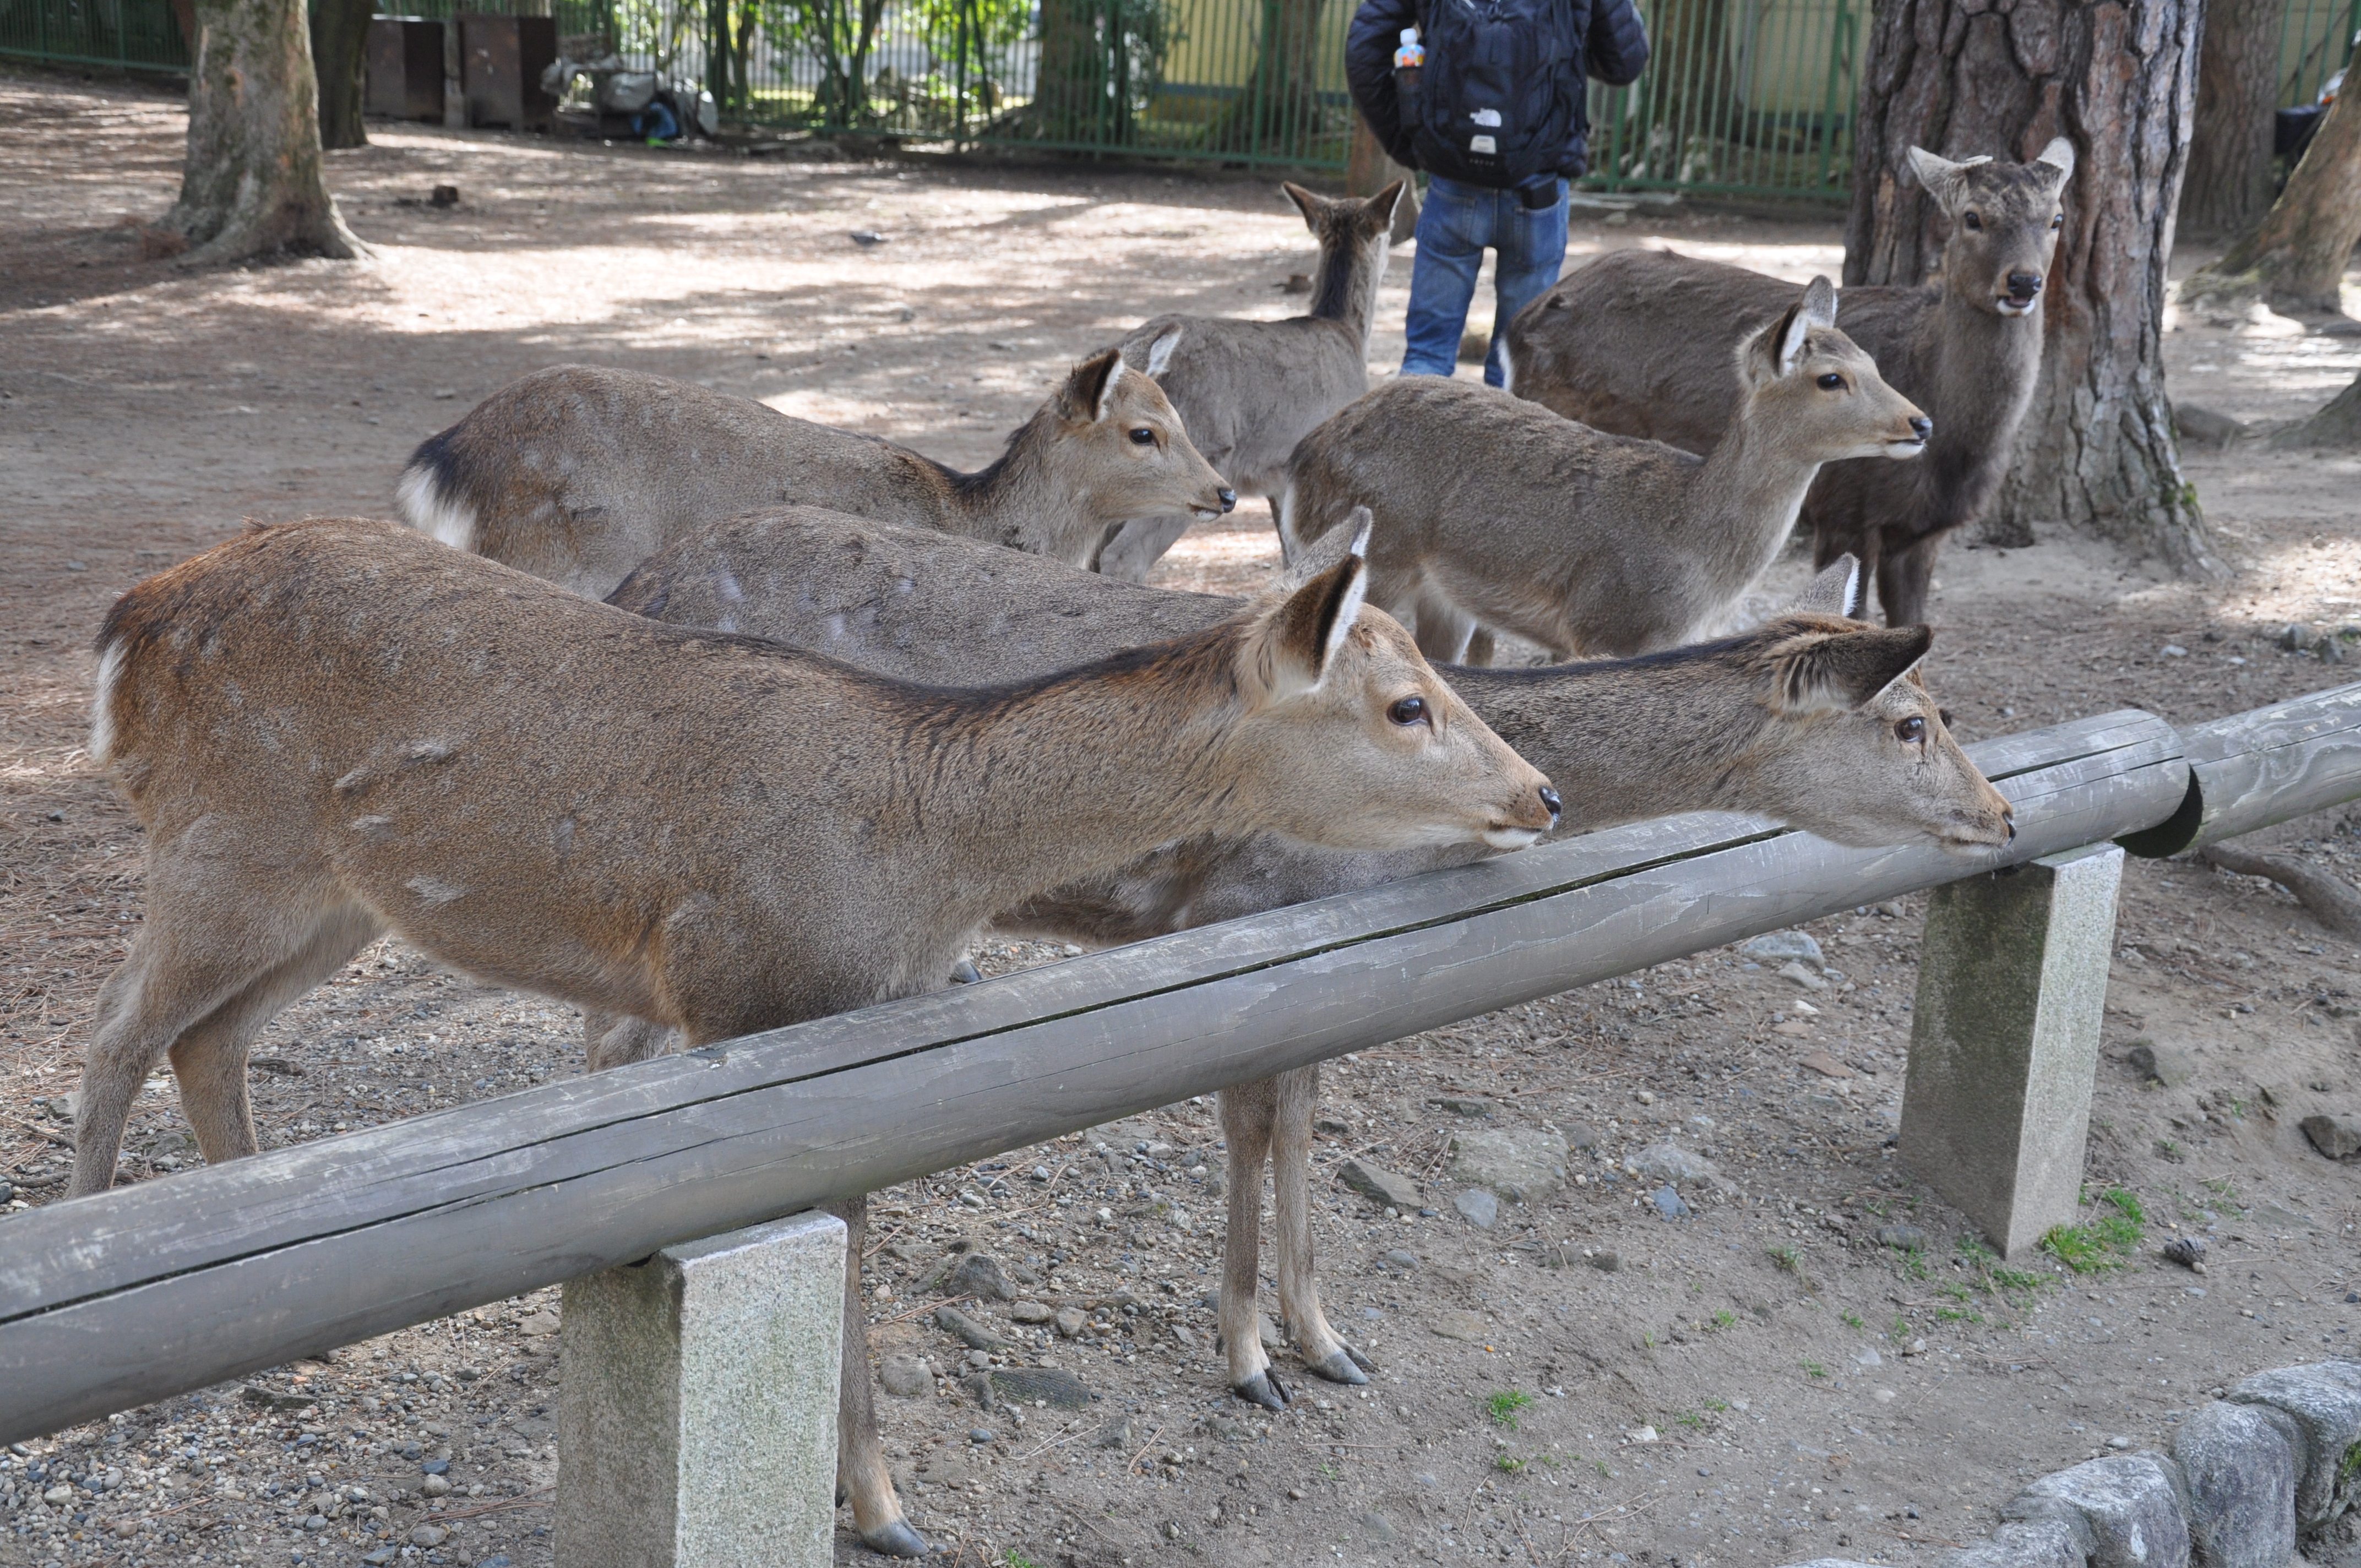 Some deers even learned to bow to be fed.